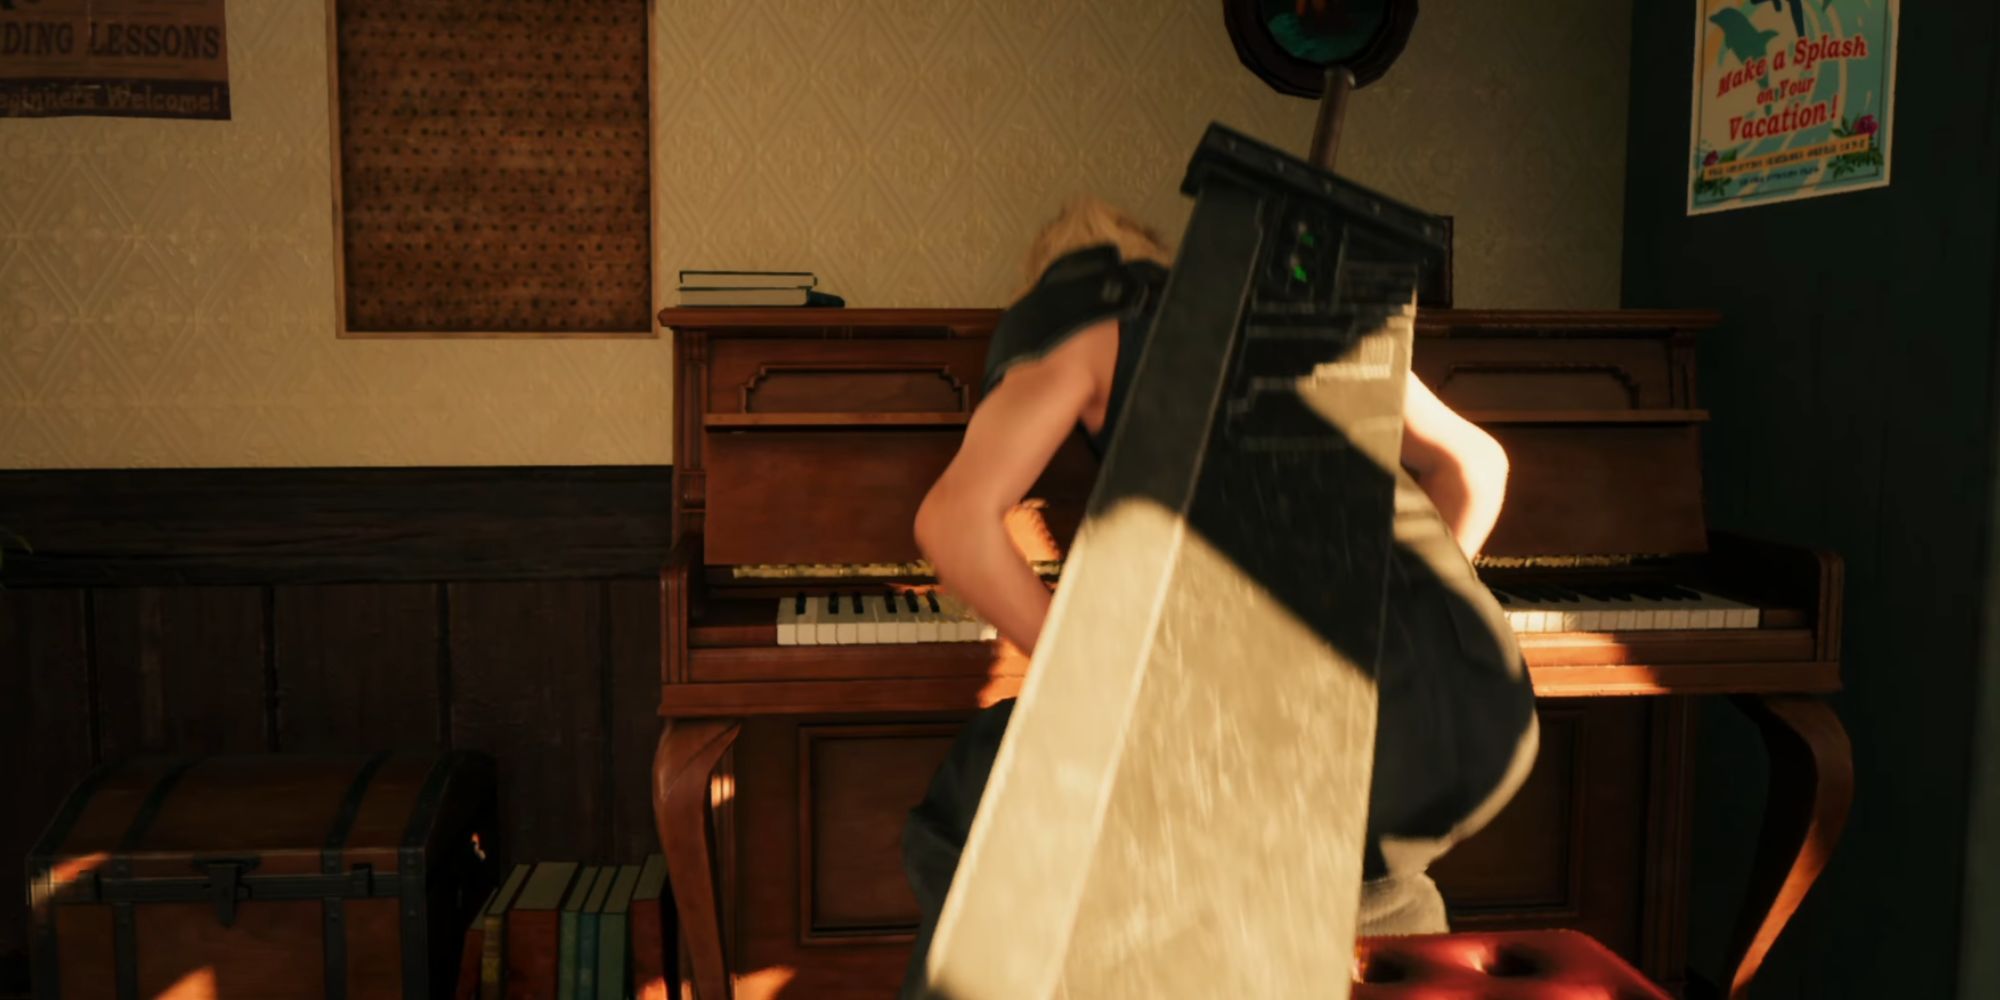 Final Fantasy 7 Rebirth - Cloud Getting Up From Piano